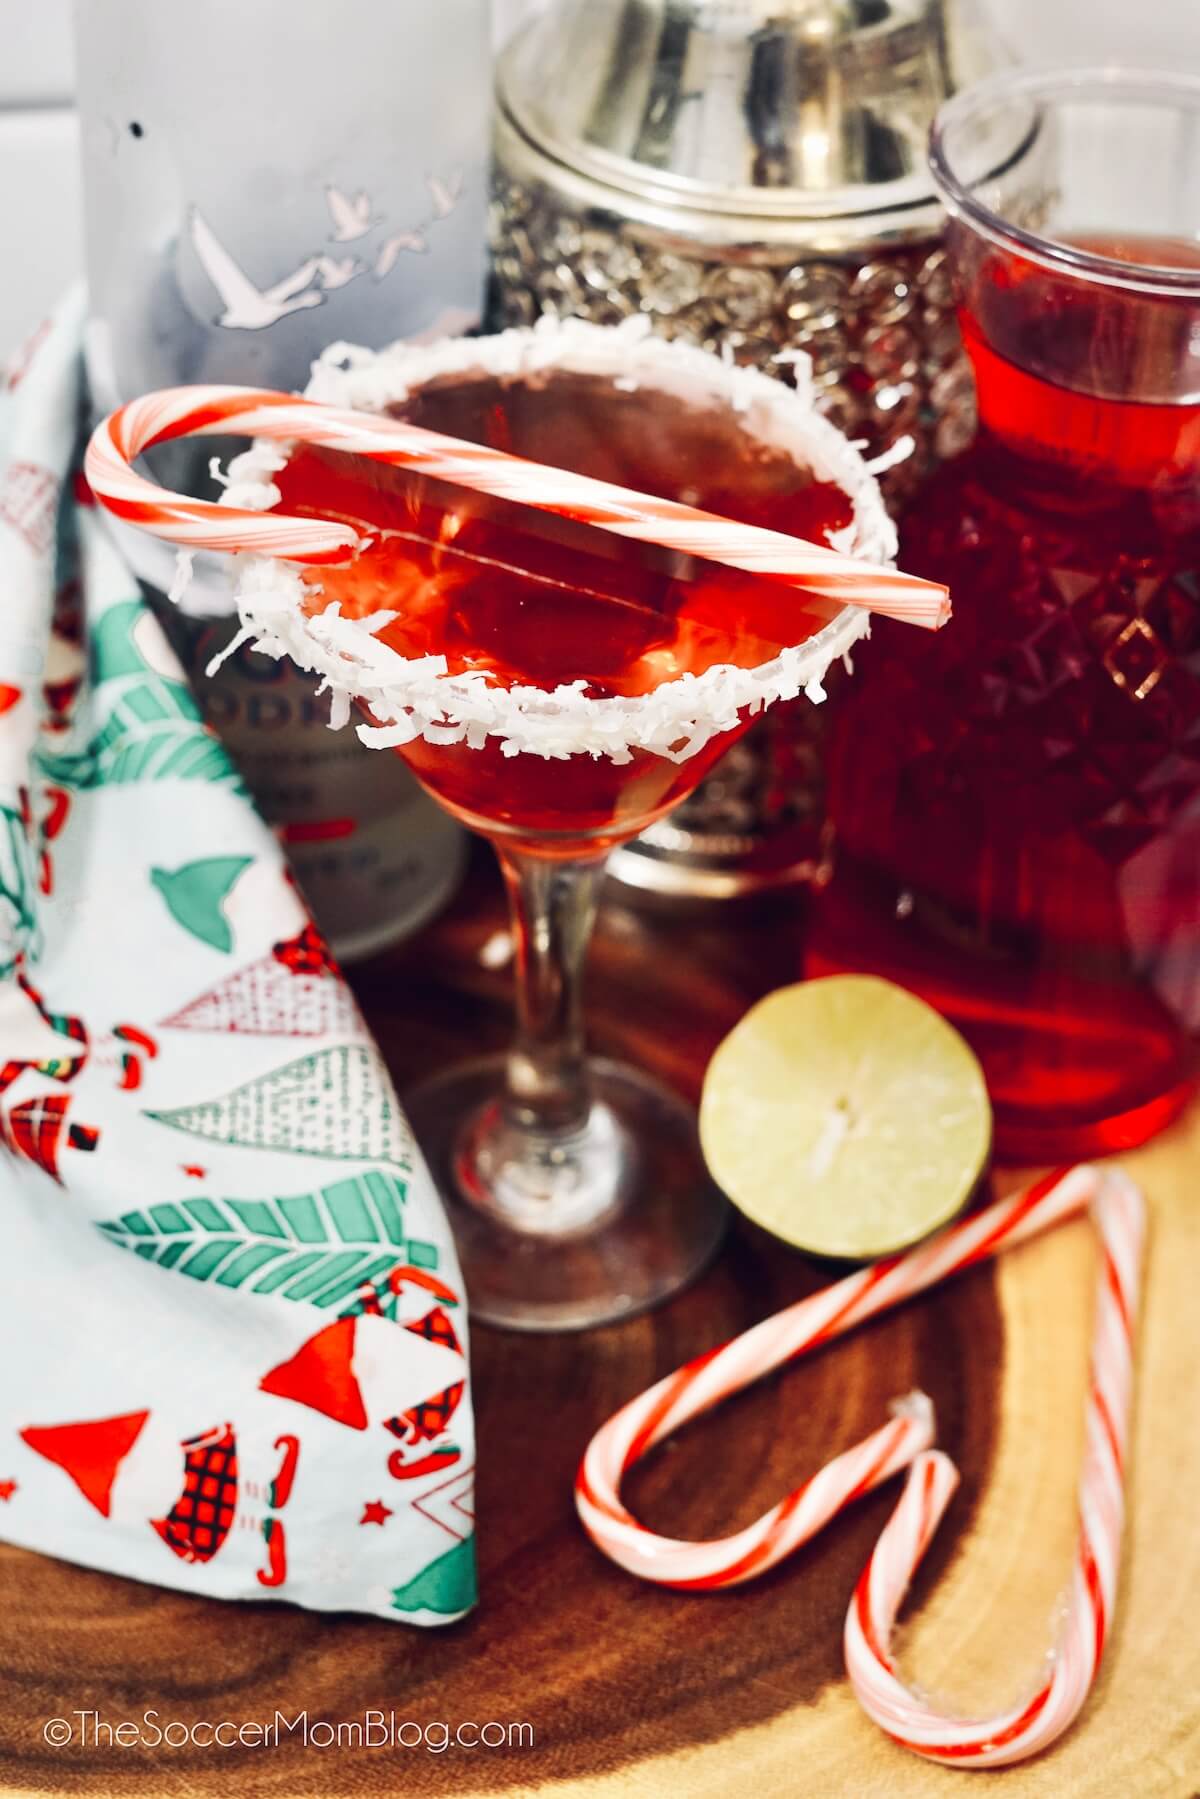 red martini with a coconut rim, surrounded by Christmas decorations and candy canes.